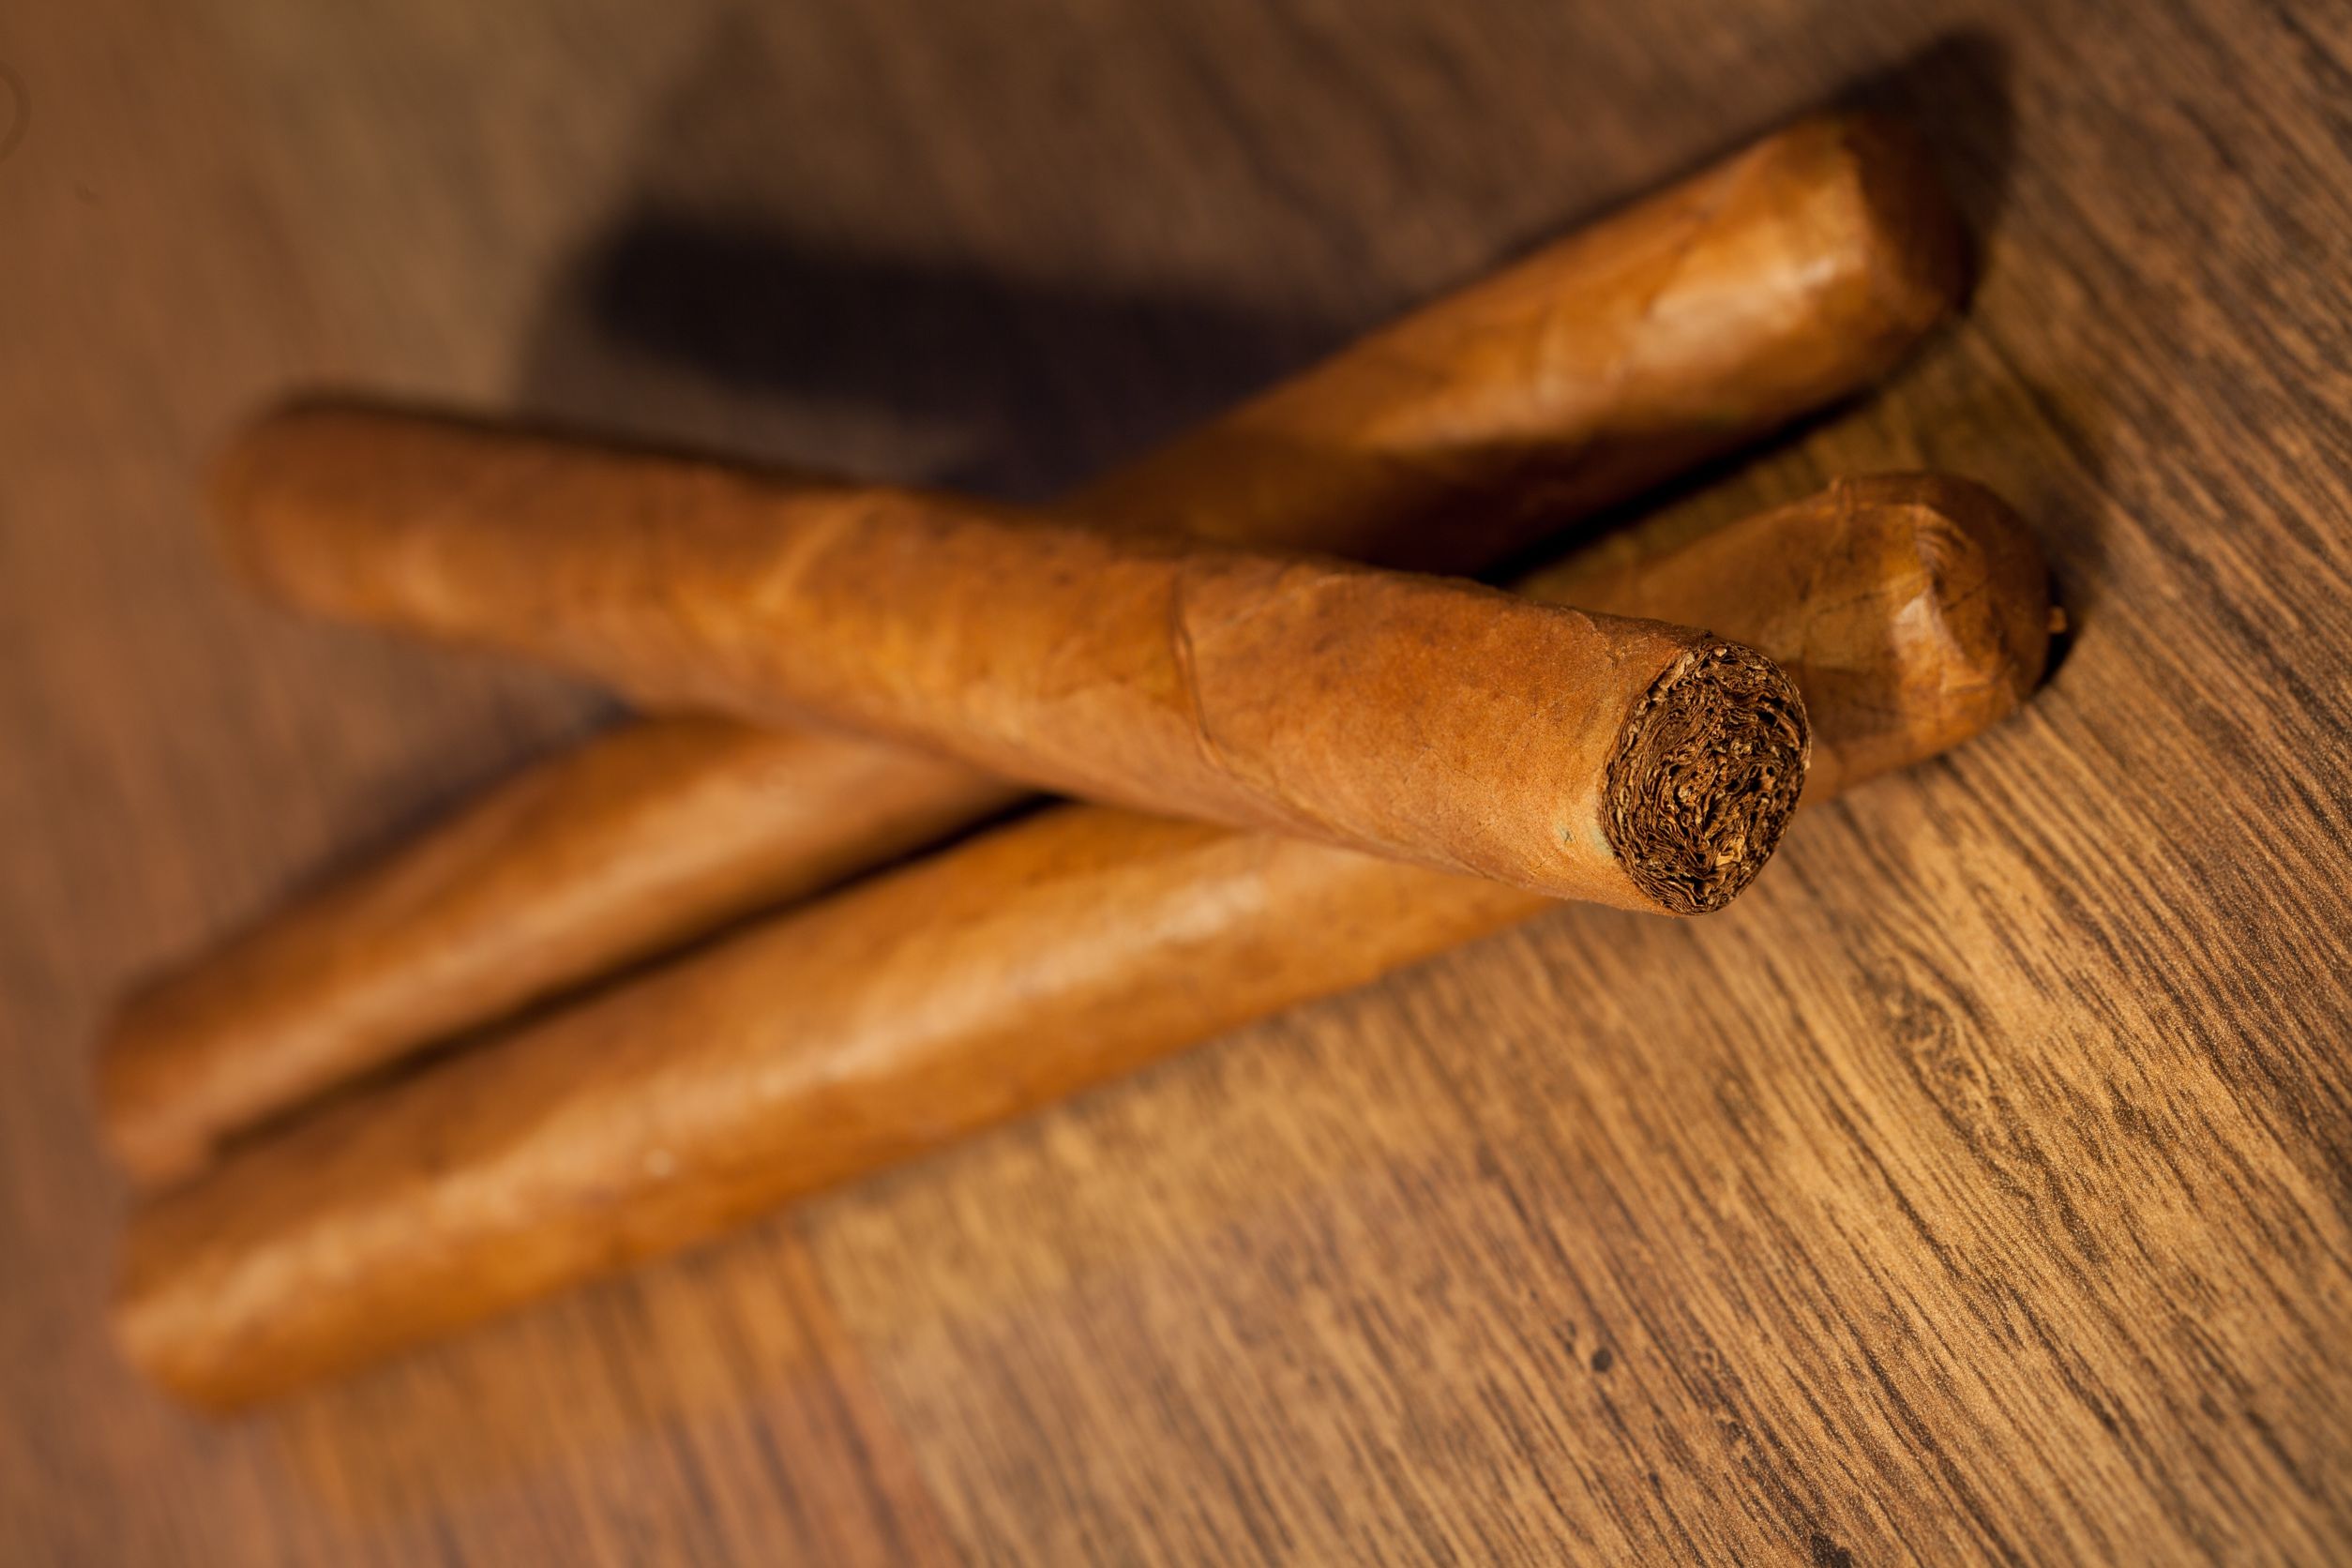 Enjoy The Classic Flavors of King Edward Imperial Cigars